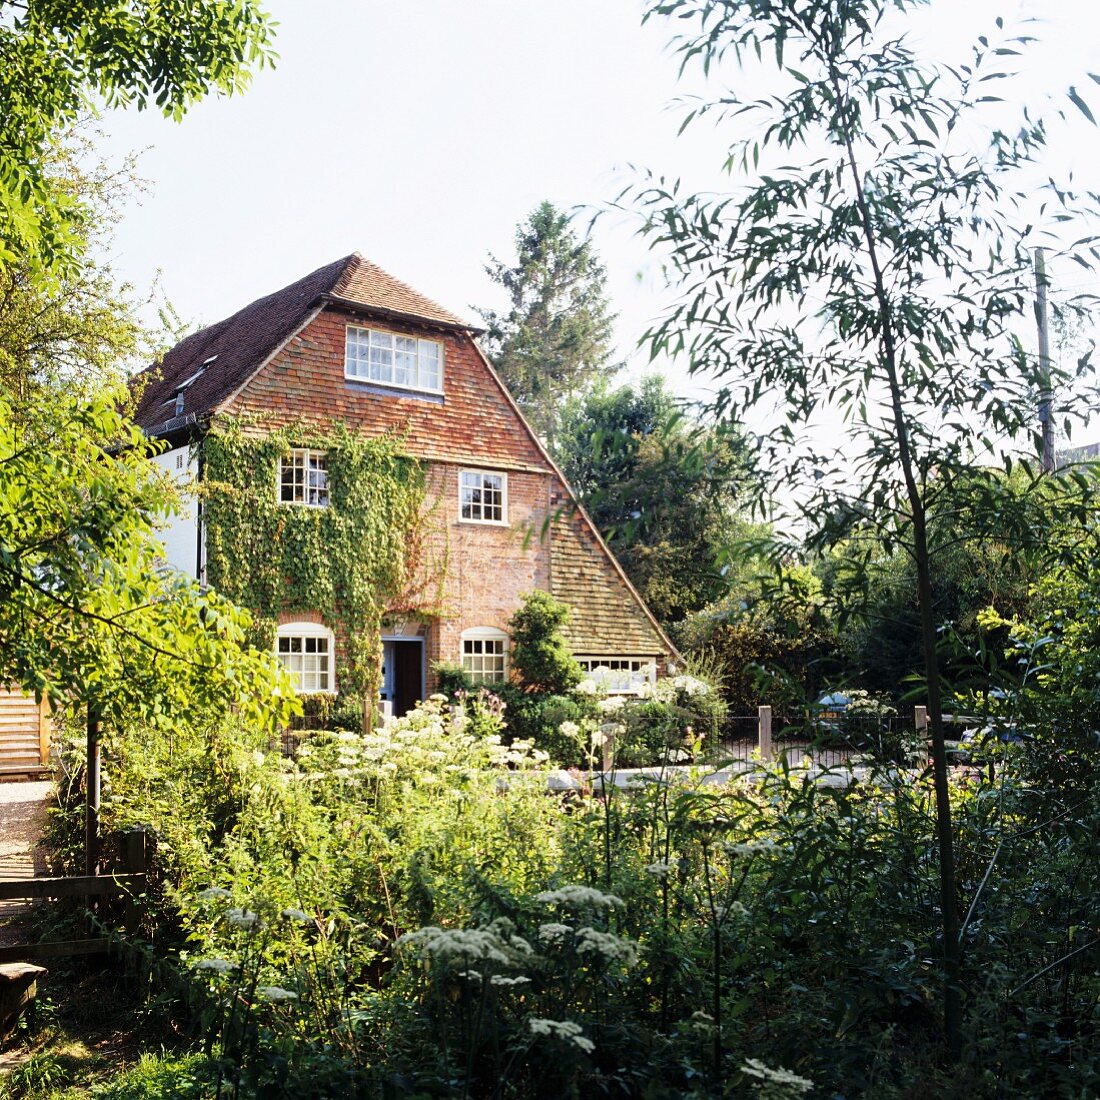 Summery garden and former mill converted into house with climber-covered facade